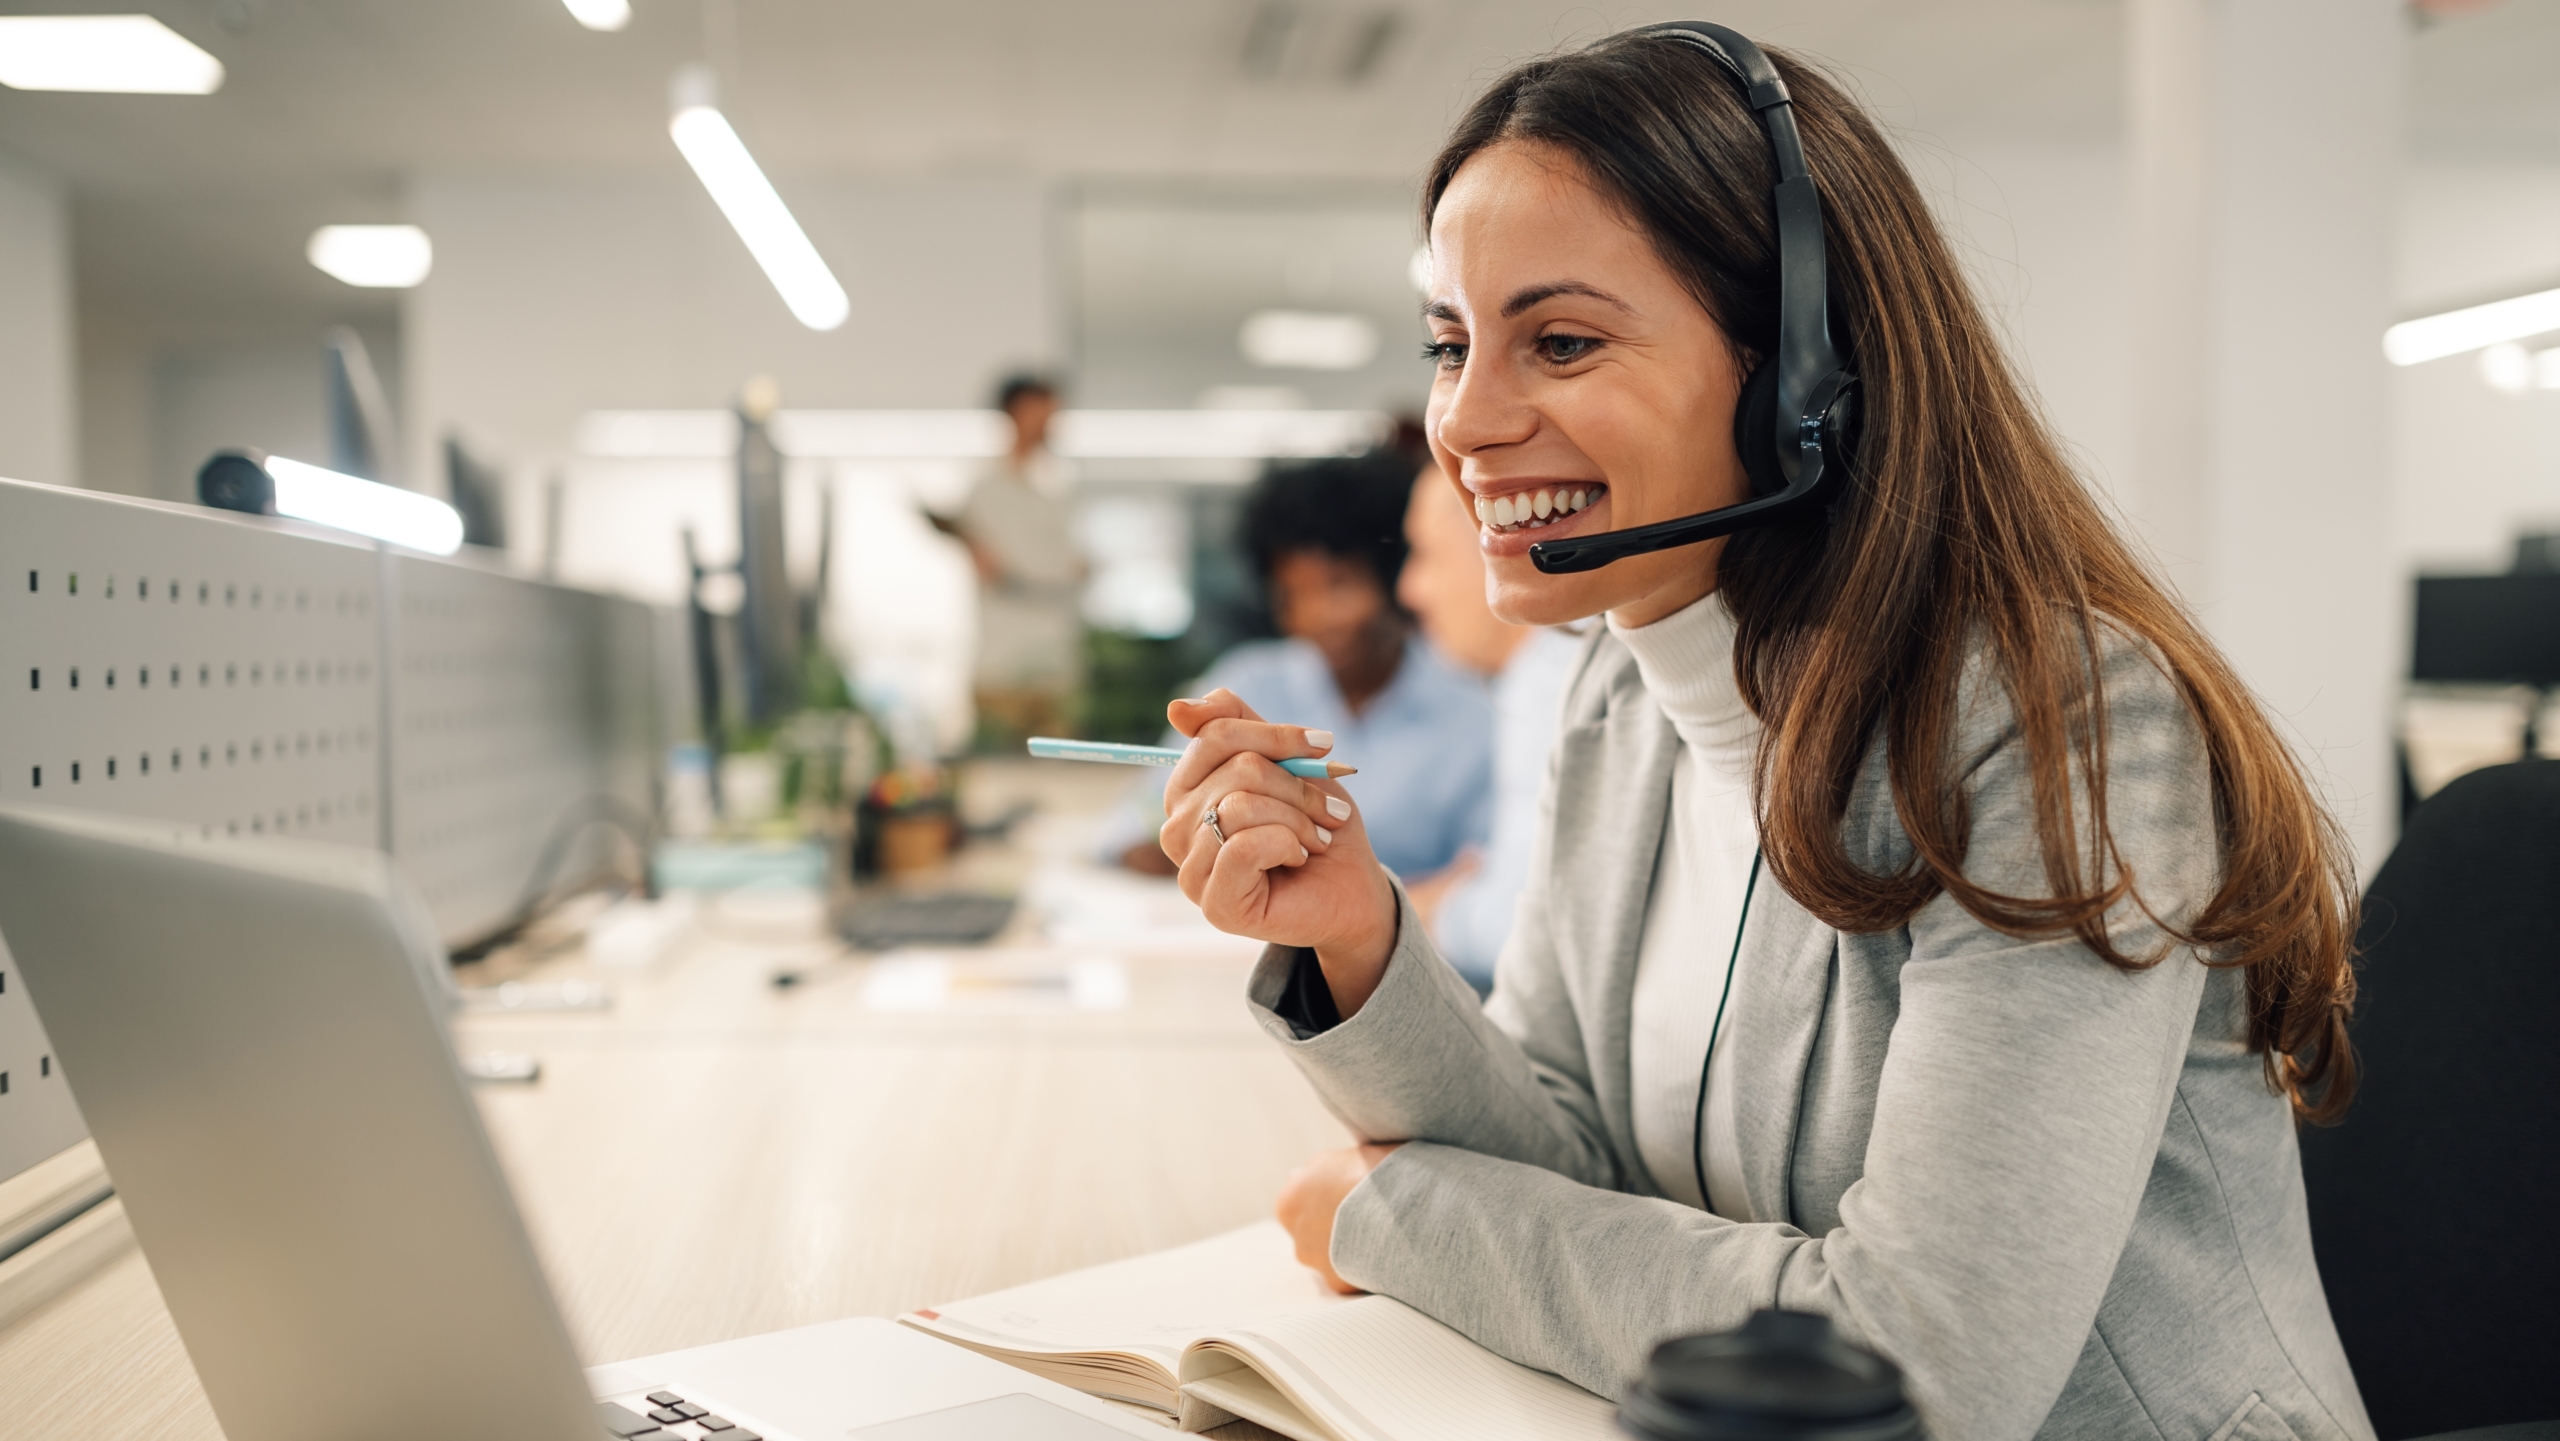 Smiling female office worker on a call using a unified communications solution, wearing a headset.